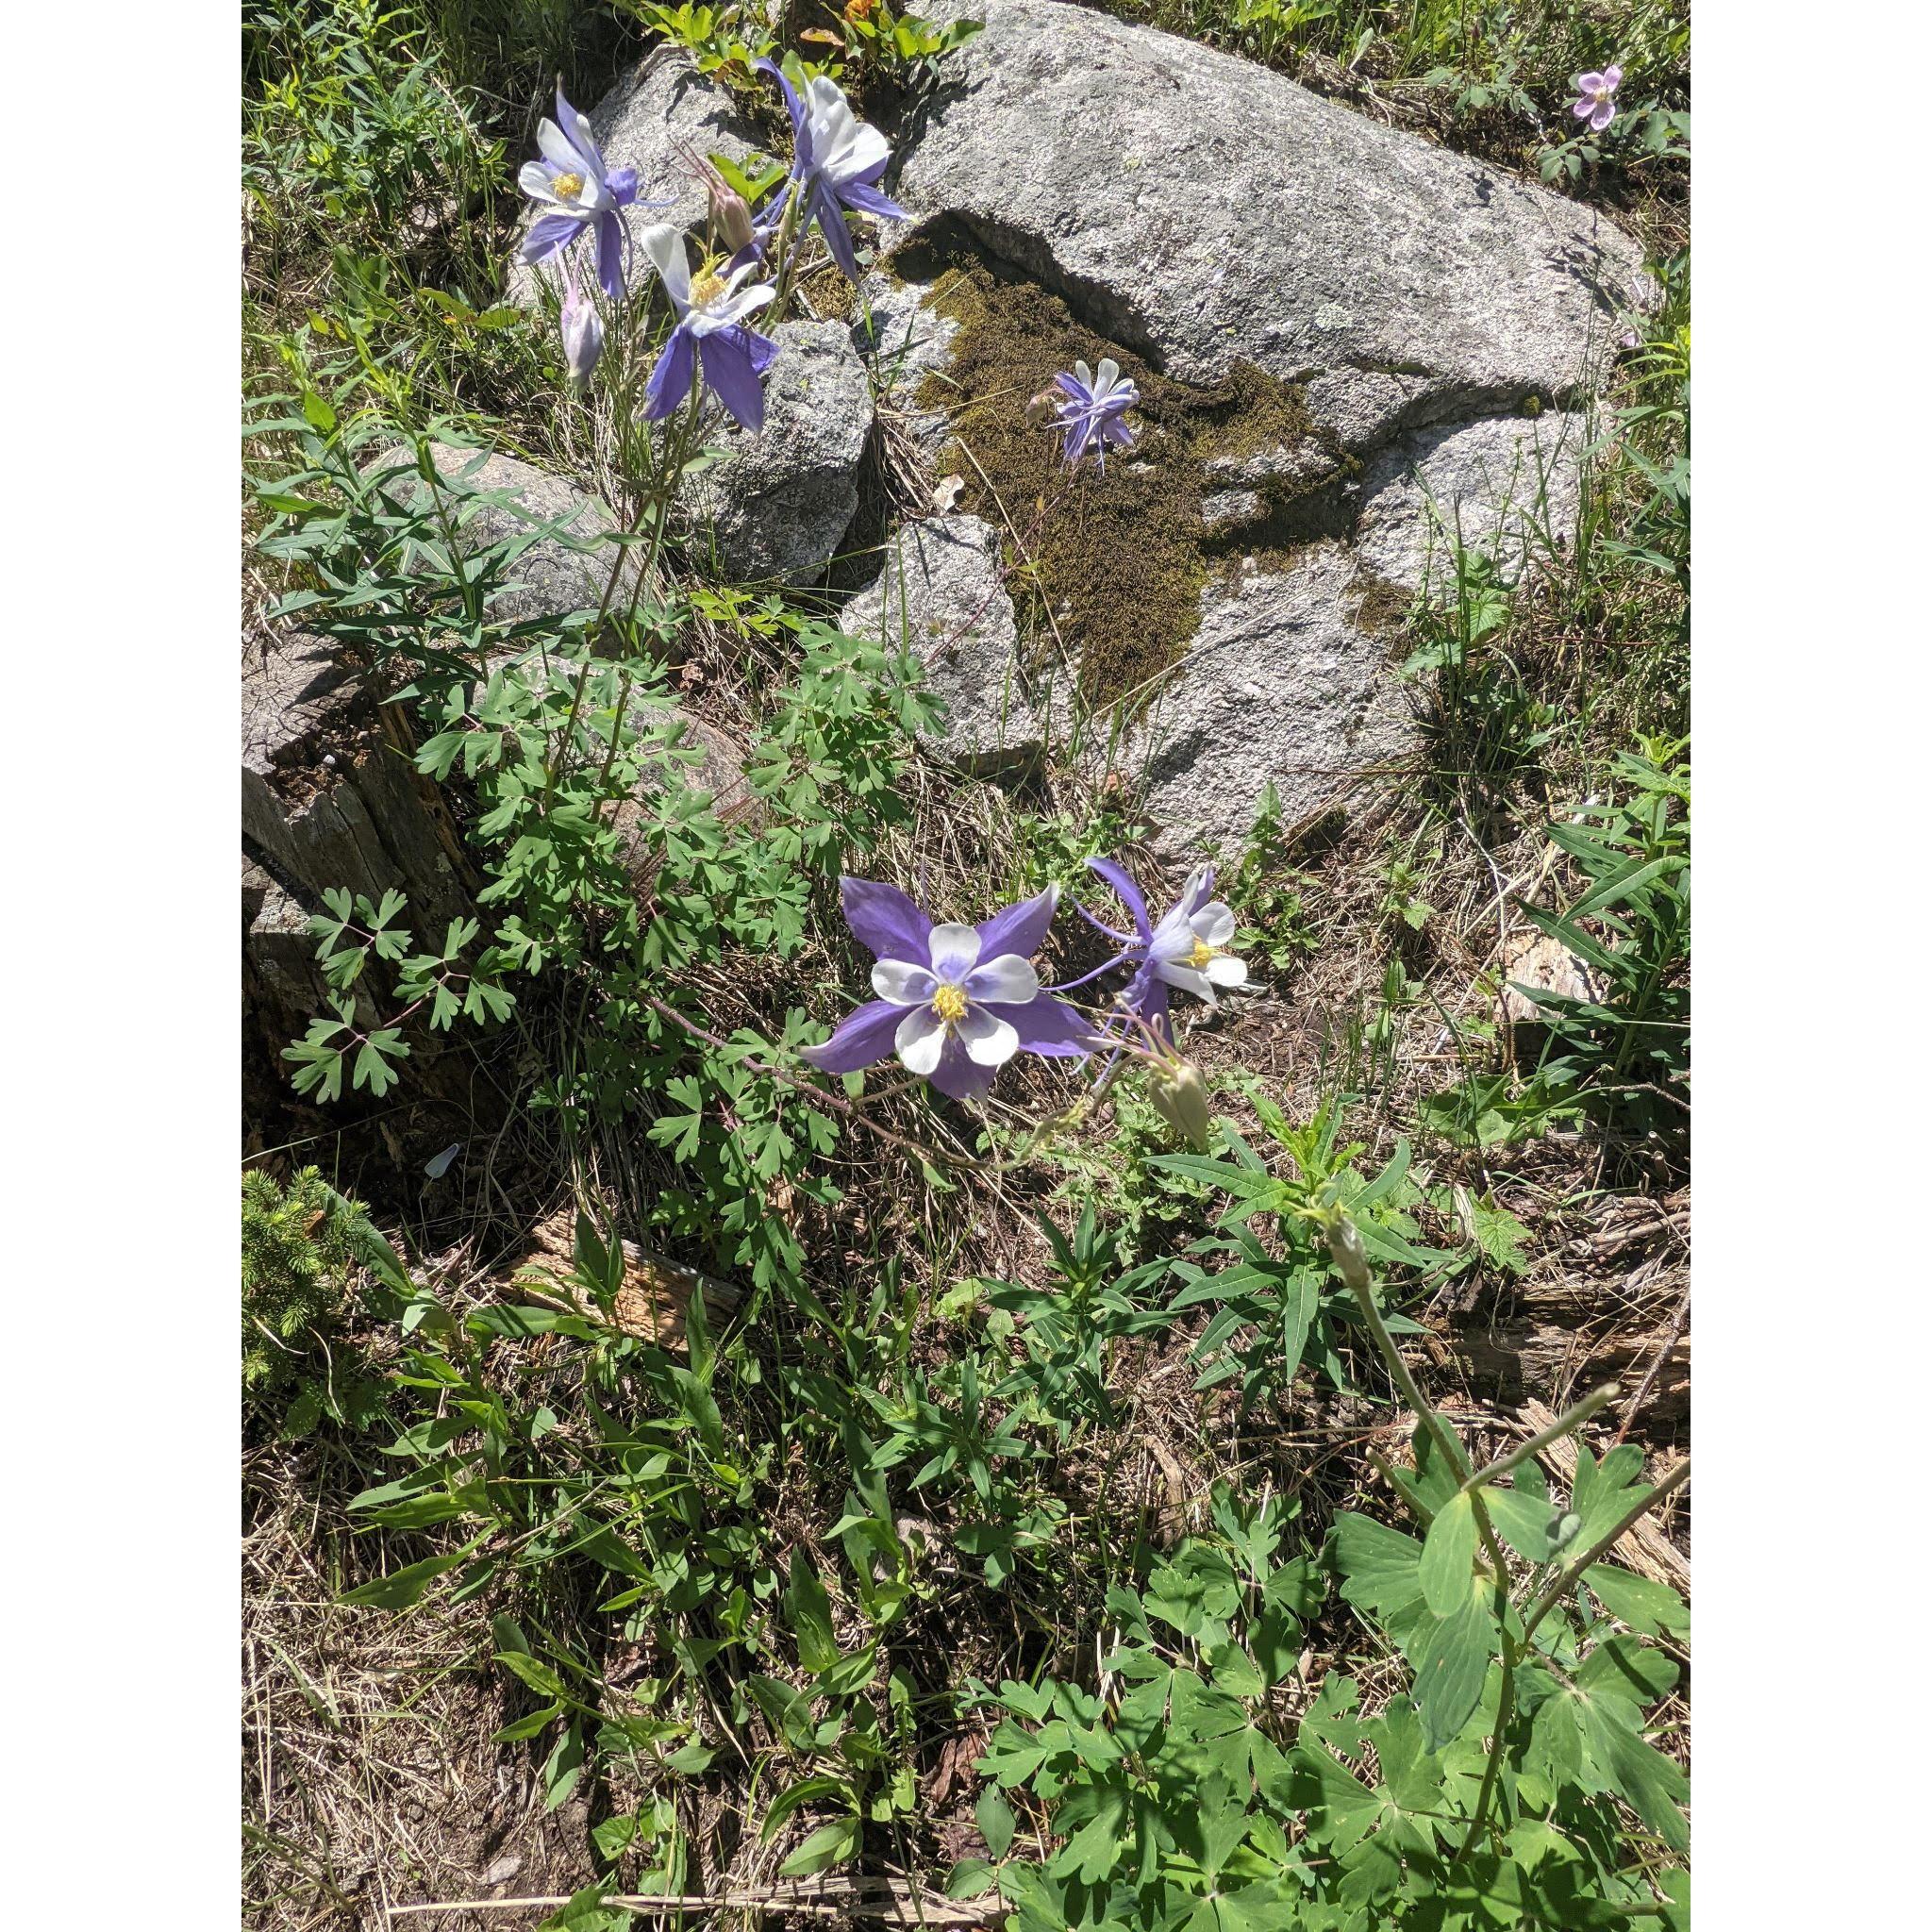 We went on a random hike somewhere and came across these beautiful Columbine flowers.